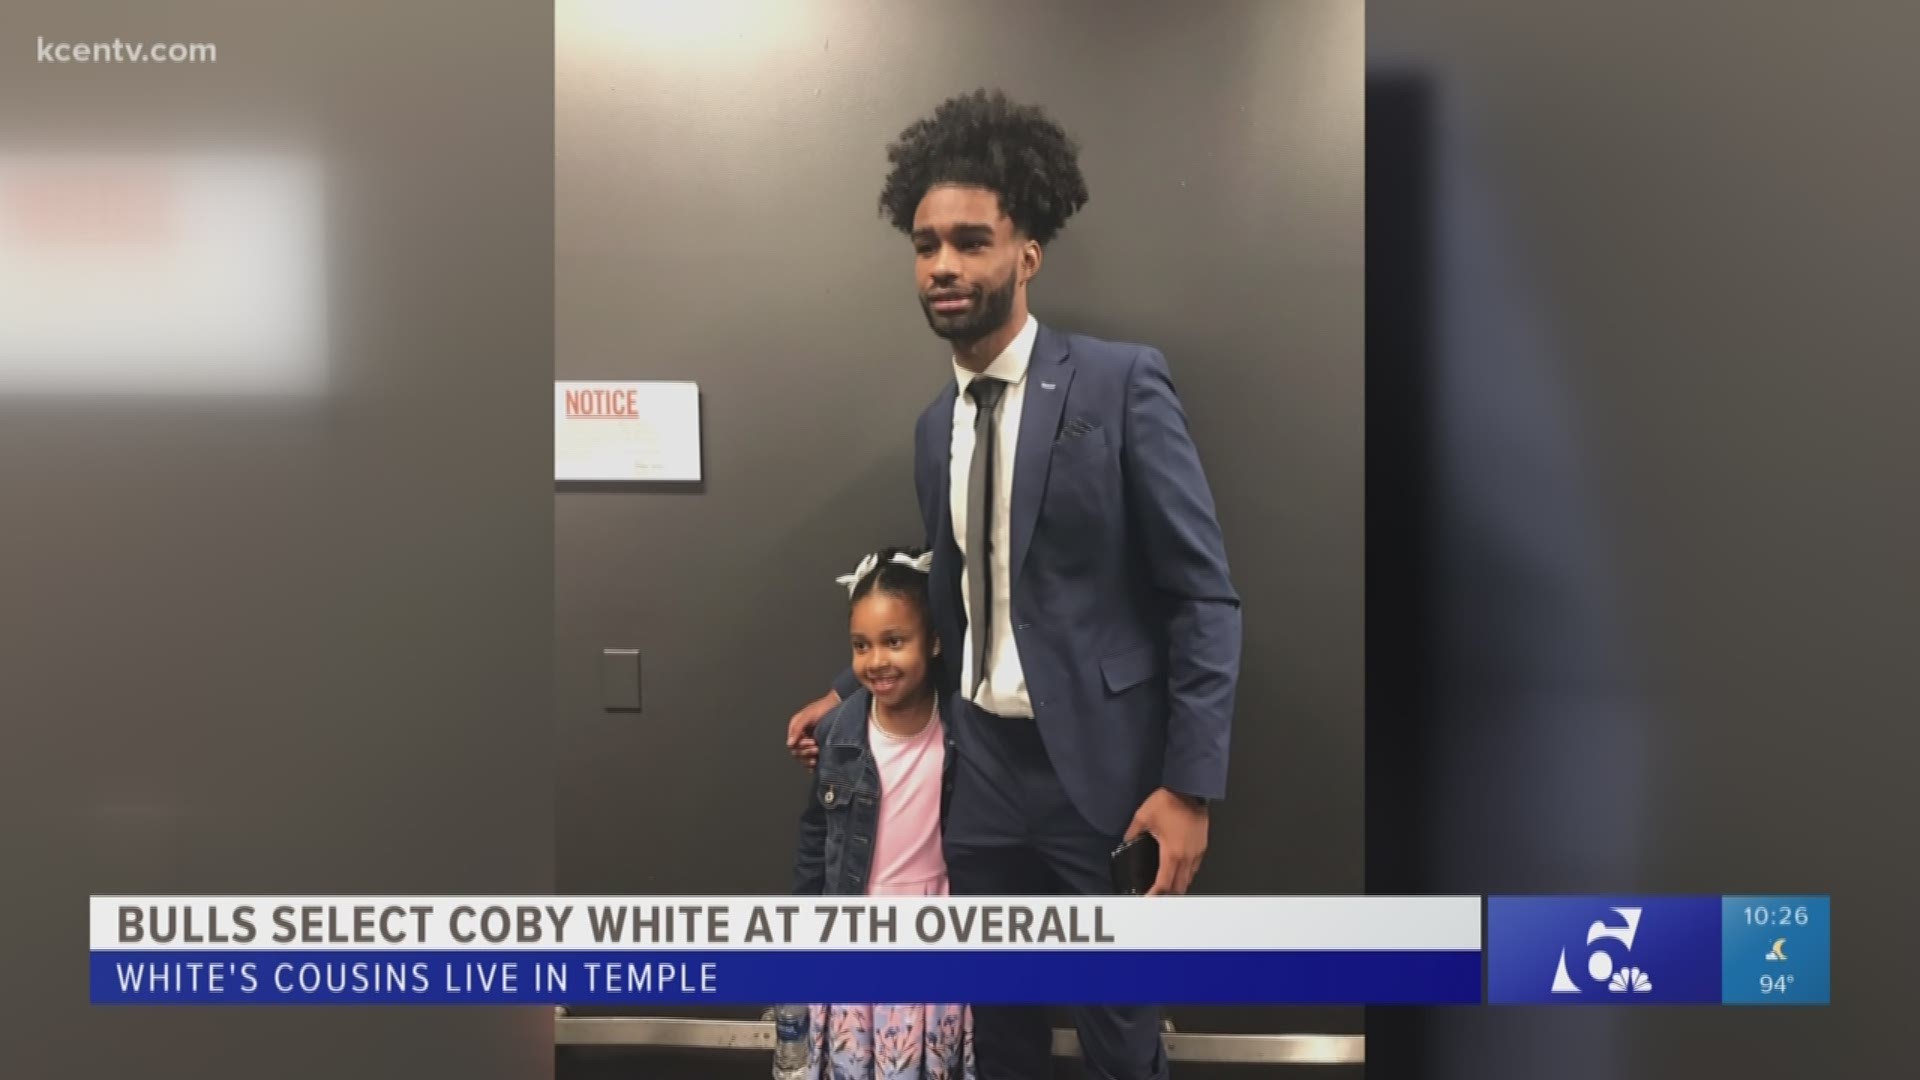 Coby White throws down vicious dunk that makes Bulls announcer